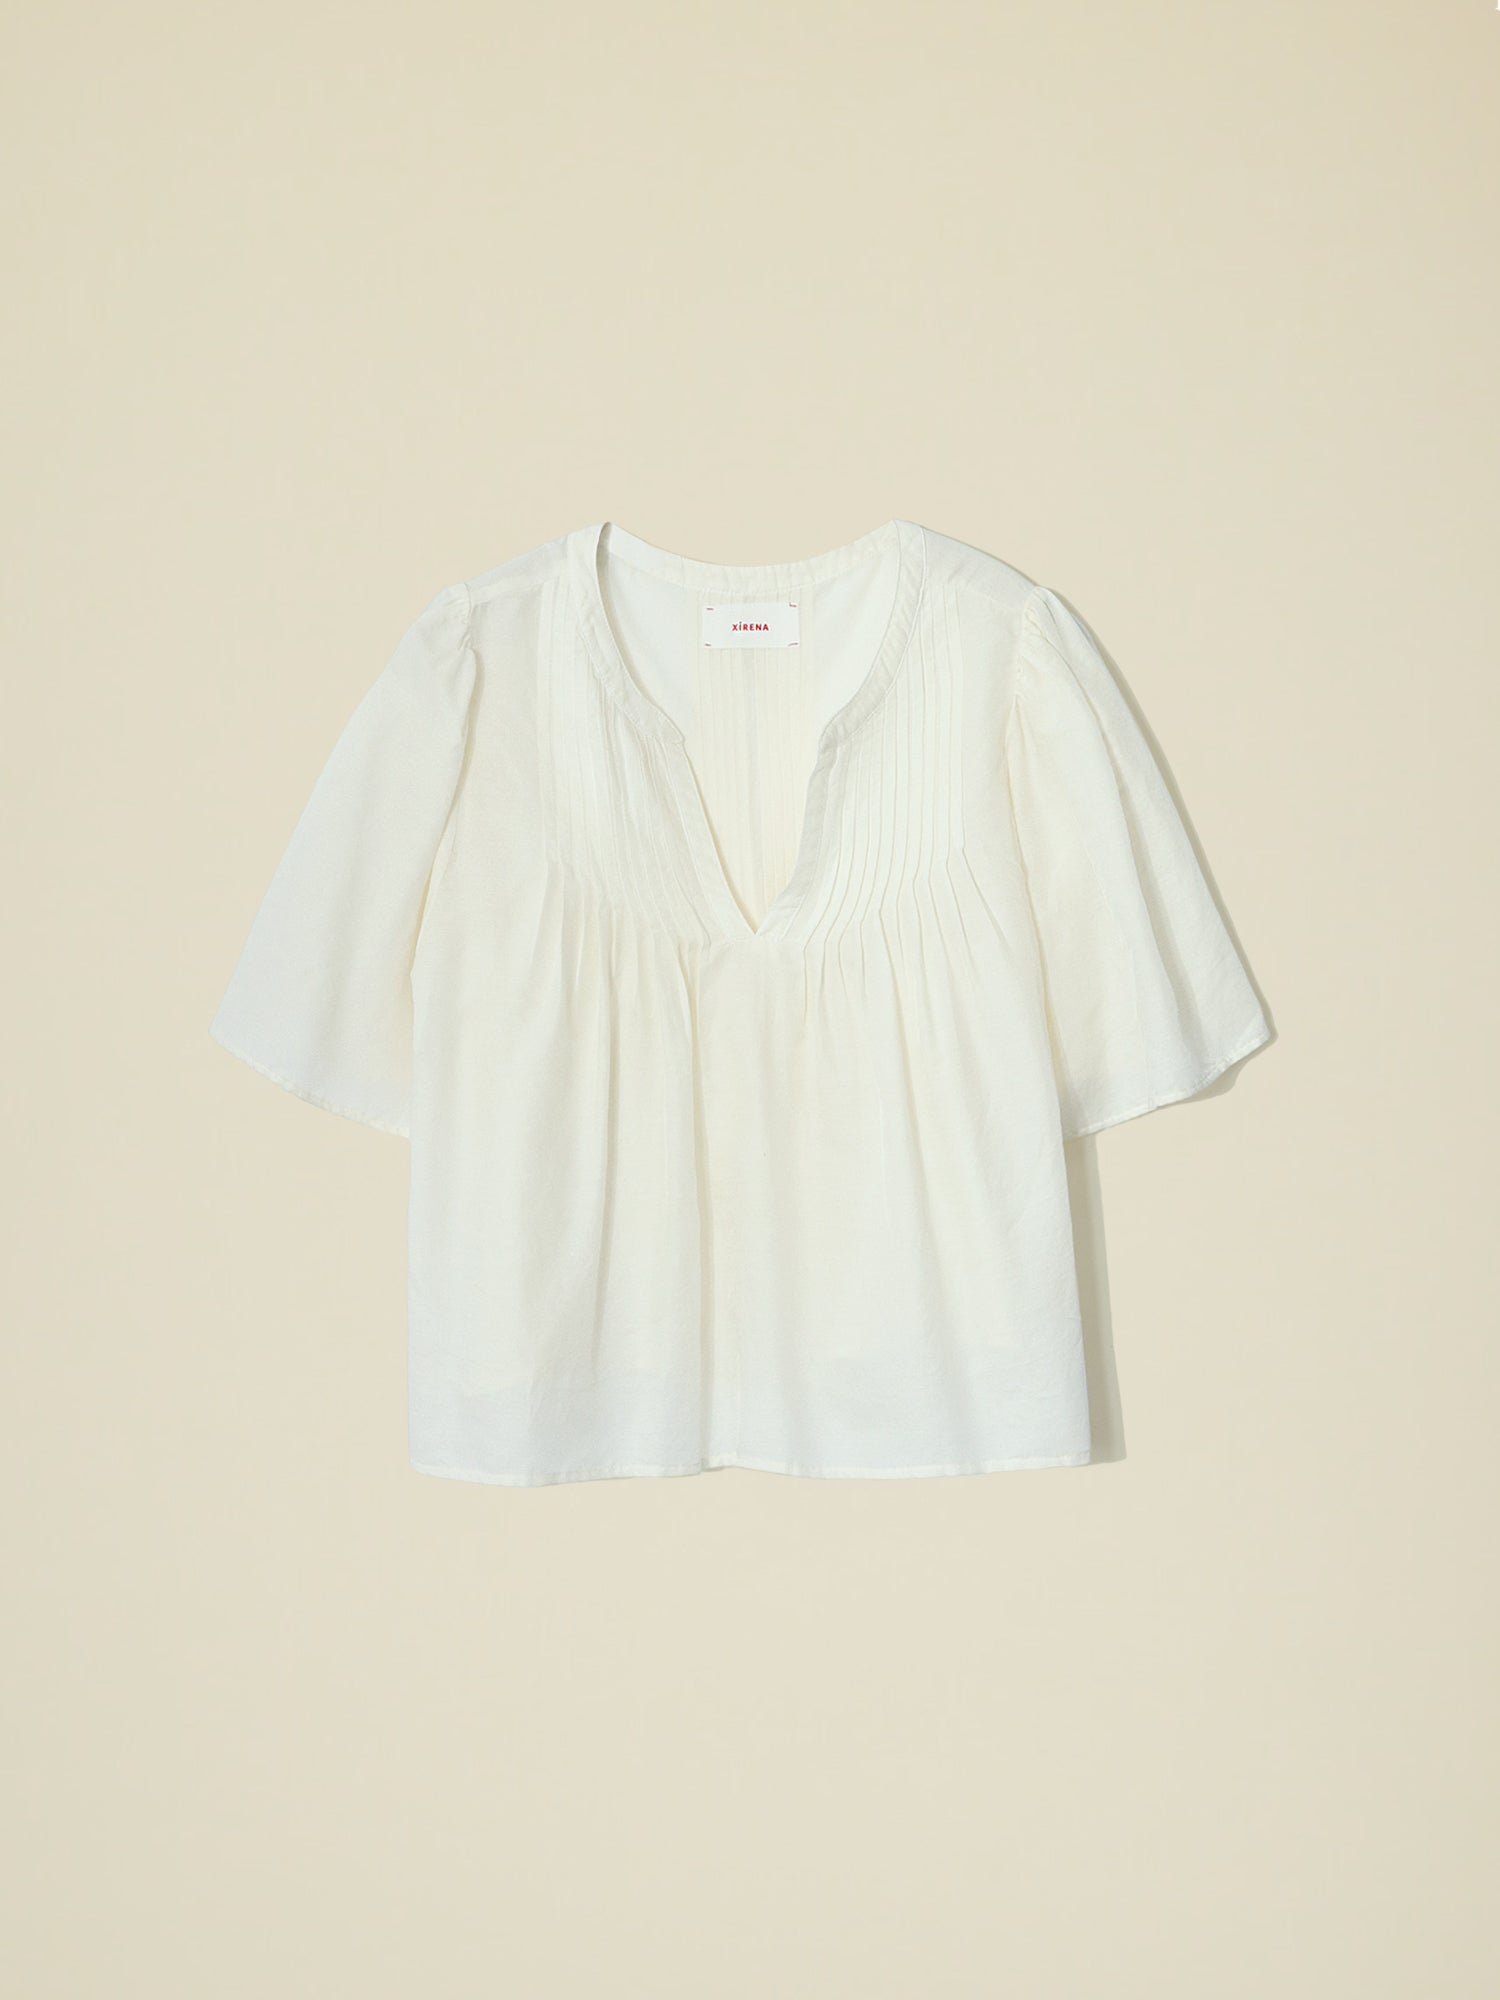 The Micah Top from Xirena is a luxurious, medium-weight, cotton-silk twill blend garment with an open-front, stand collar,